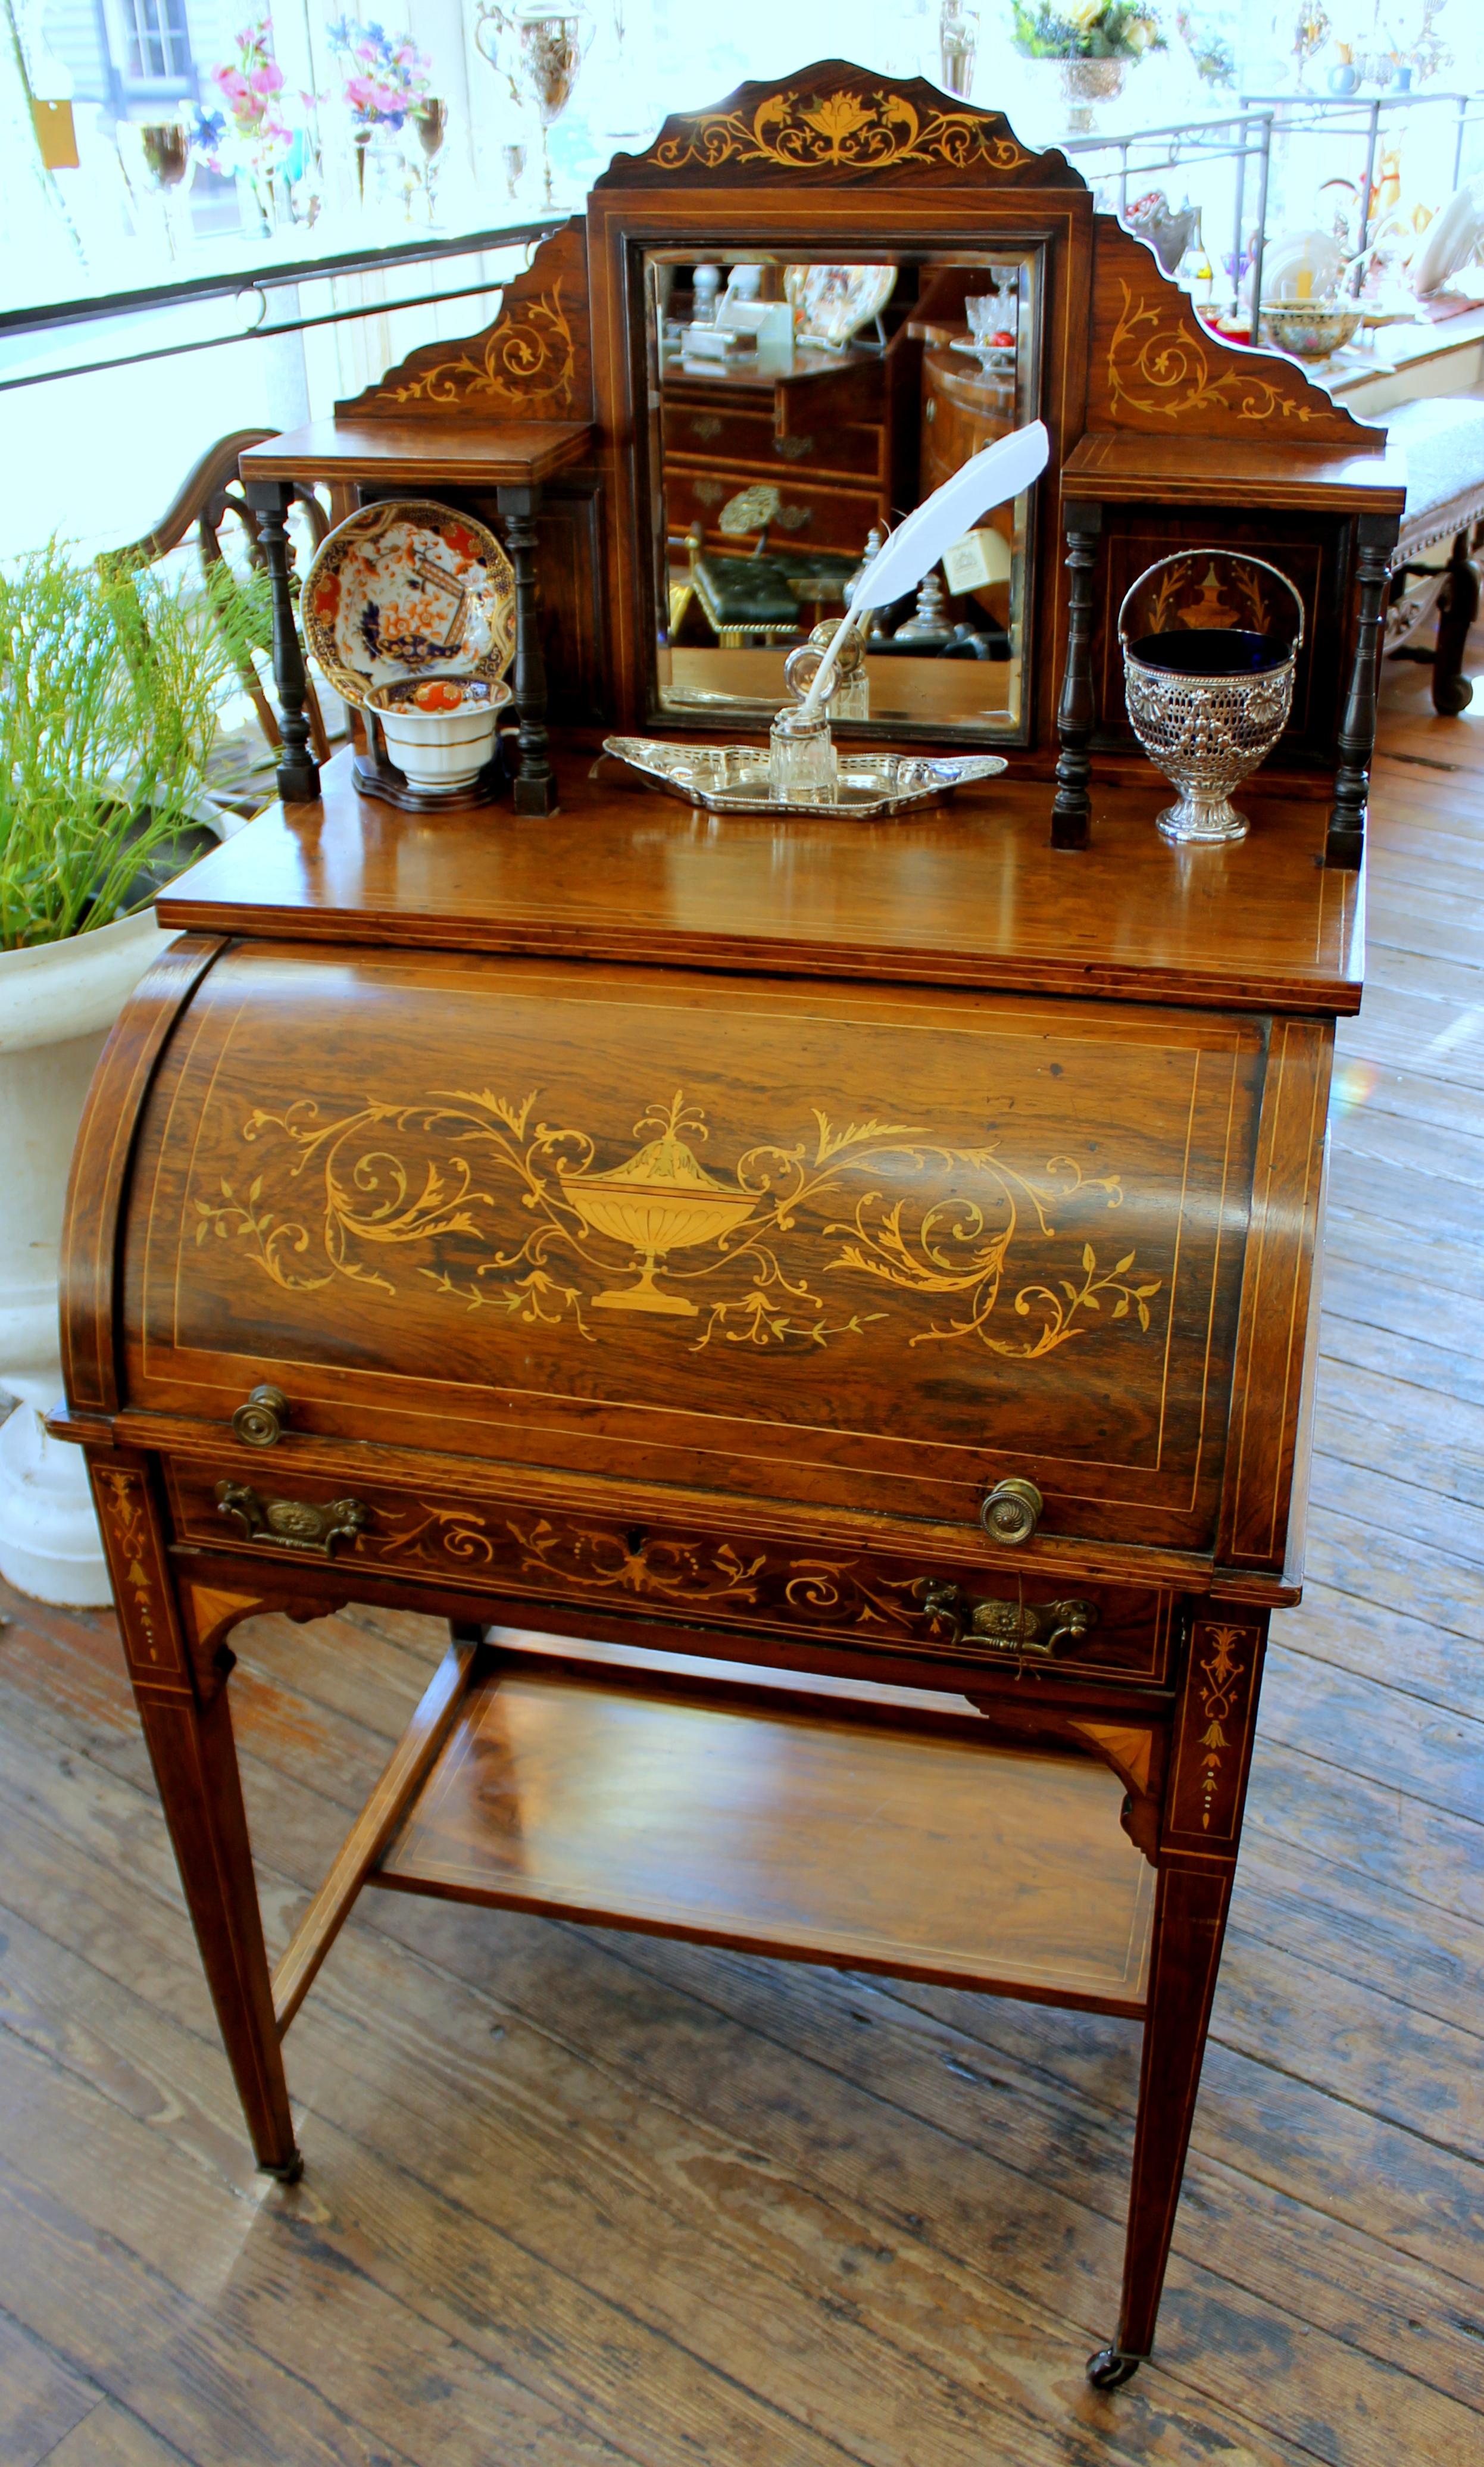 19th Century Antique English Marquetry Inlaid Rosewood Cylinder-Top Ladies Writing Desk